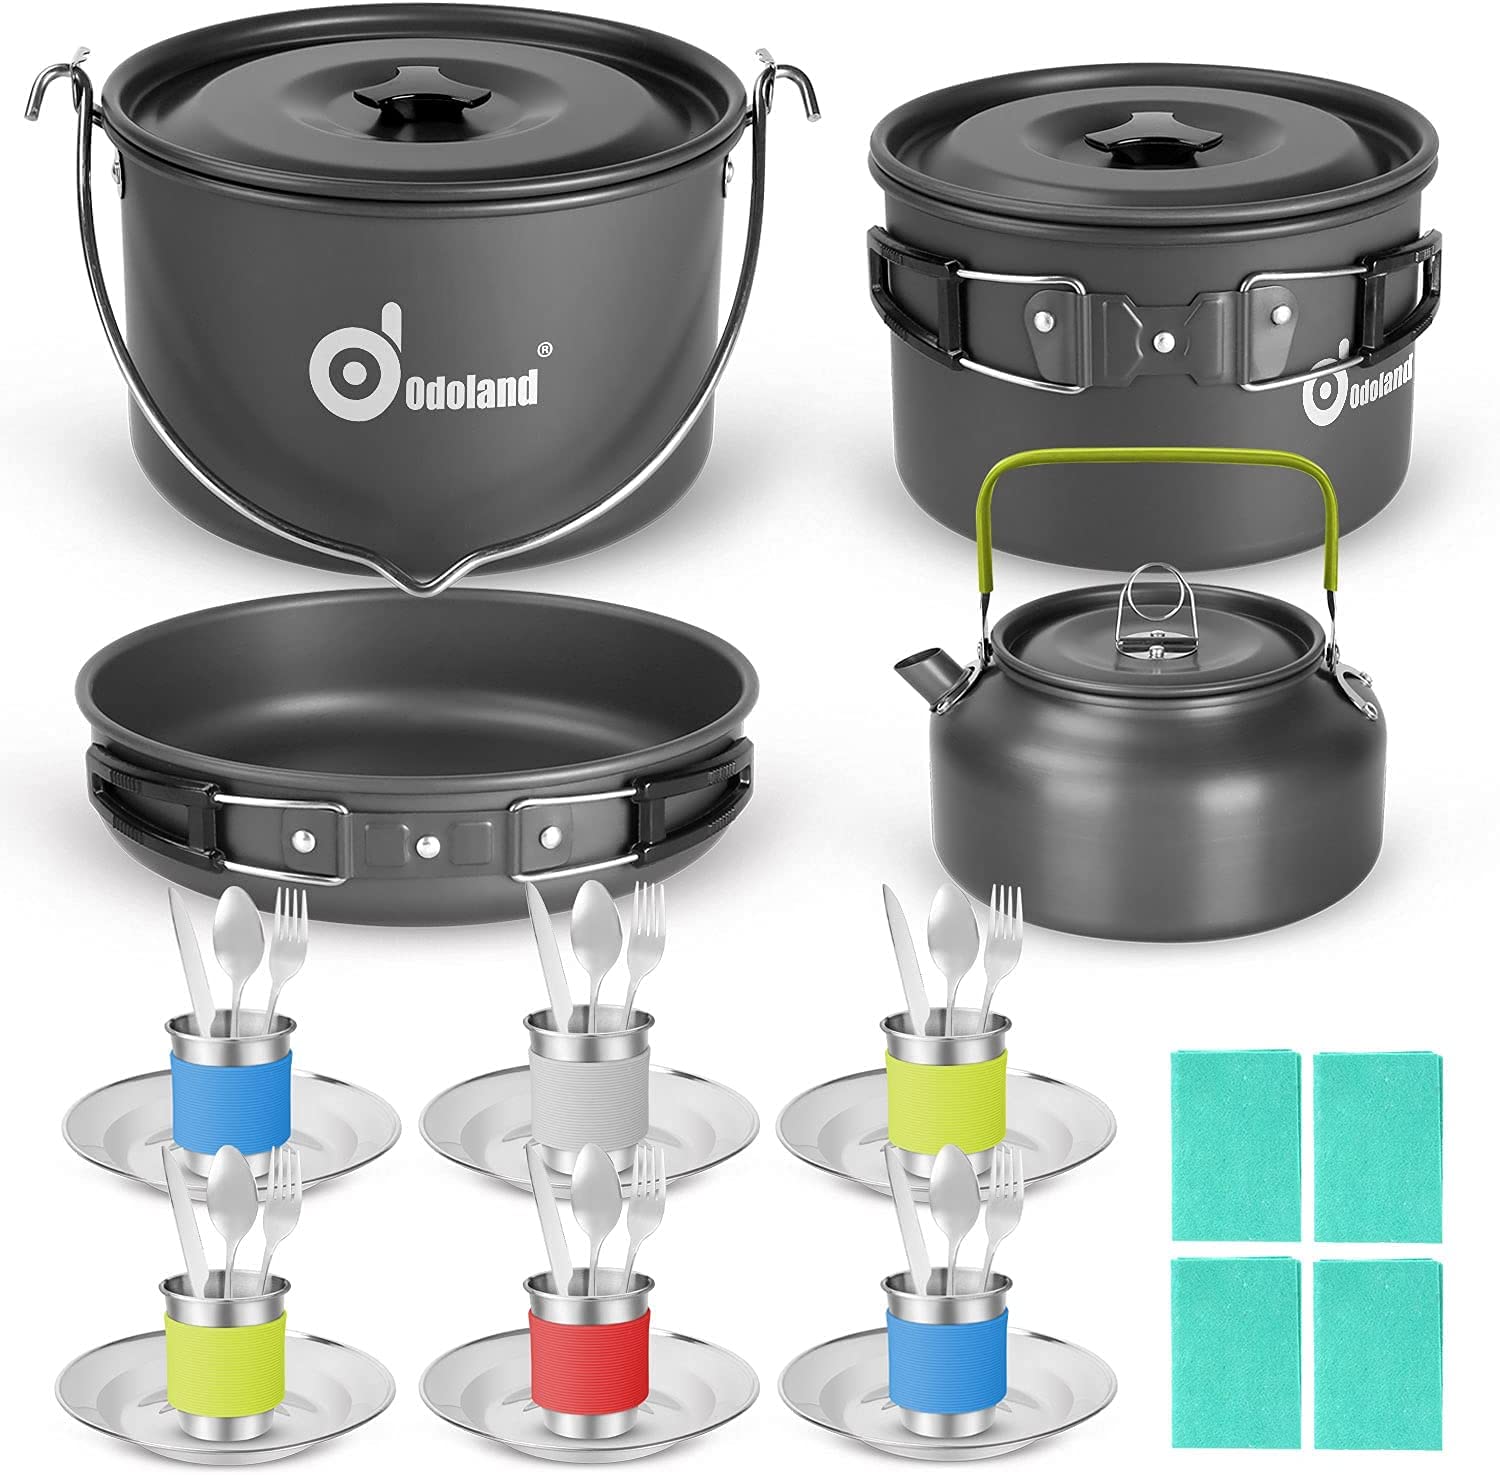 Odoland 39pcs Camping Cookware Mess Kit for 6 People, Large Size Hanging Pot Pan Kettle with Base Dinner Cutlery Sets, Cups Dishes Forks Spoons Kit for Outdoor Camping Hiking and Picnic